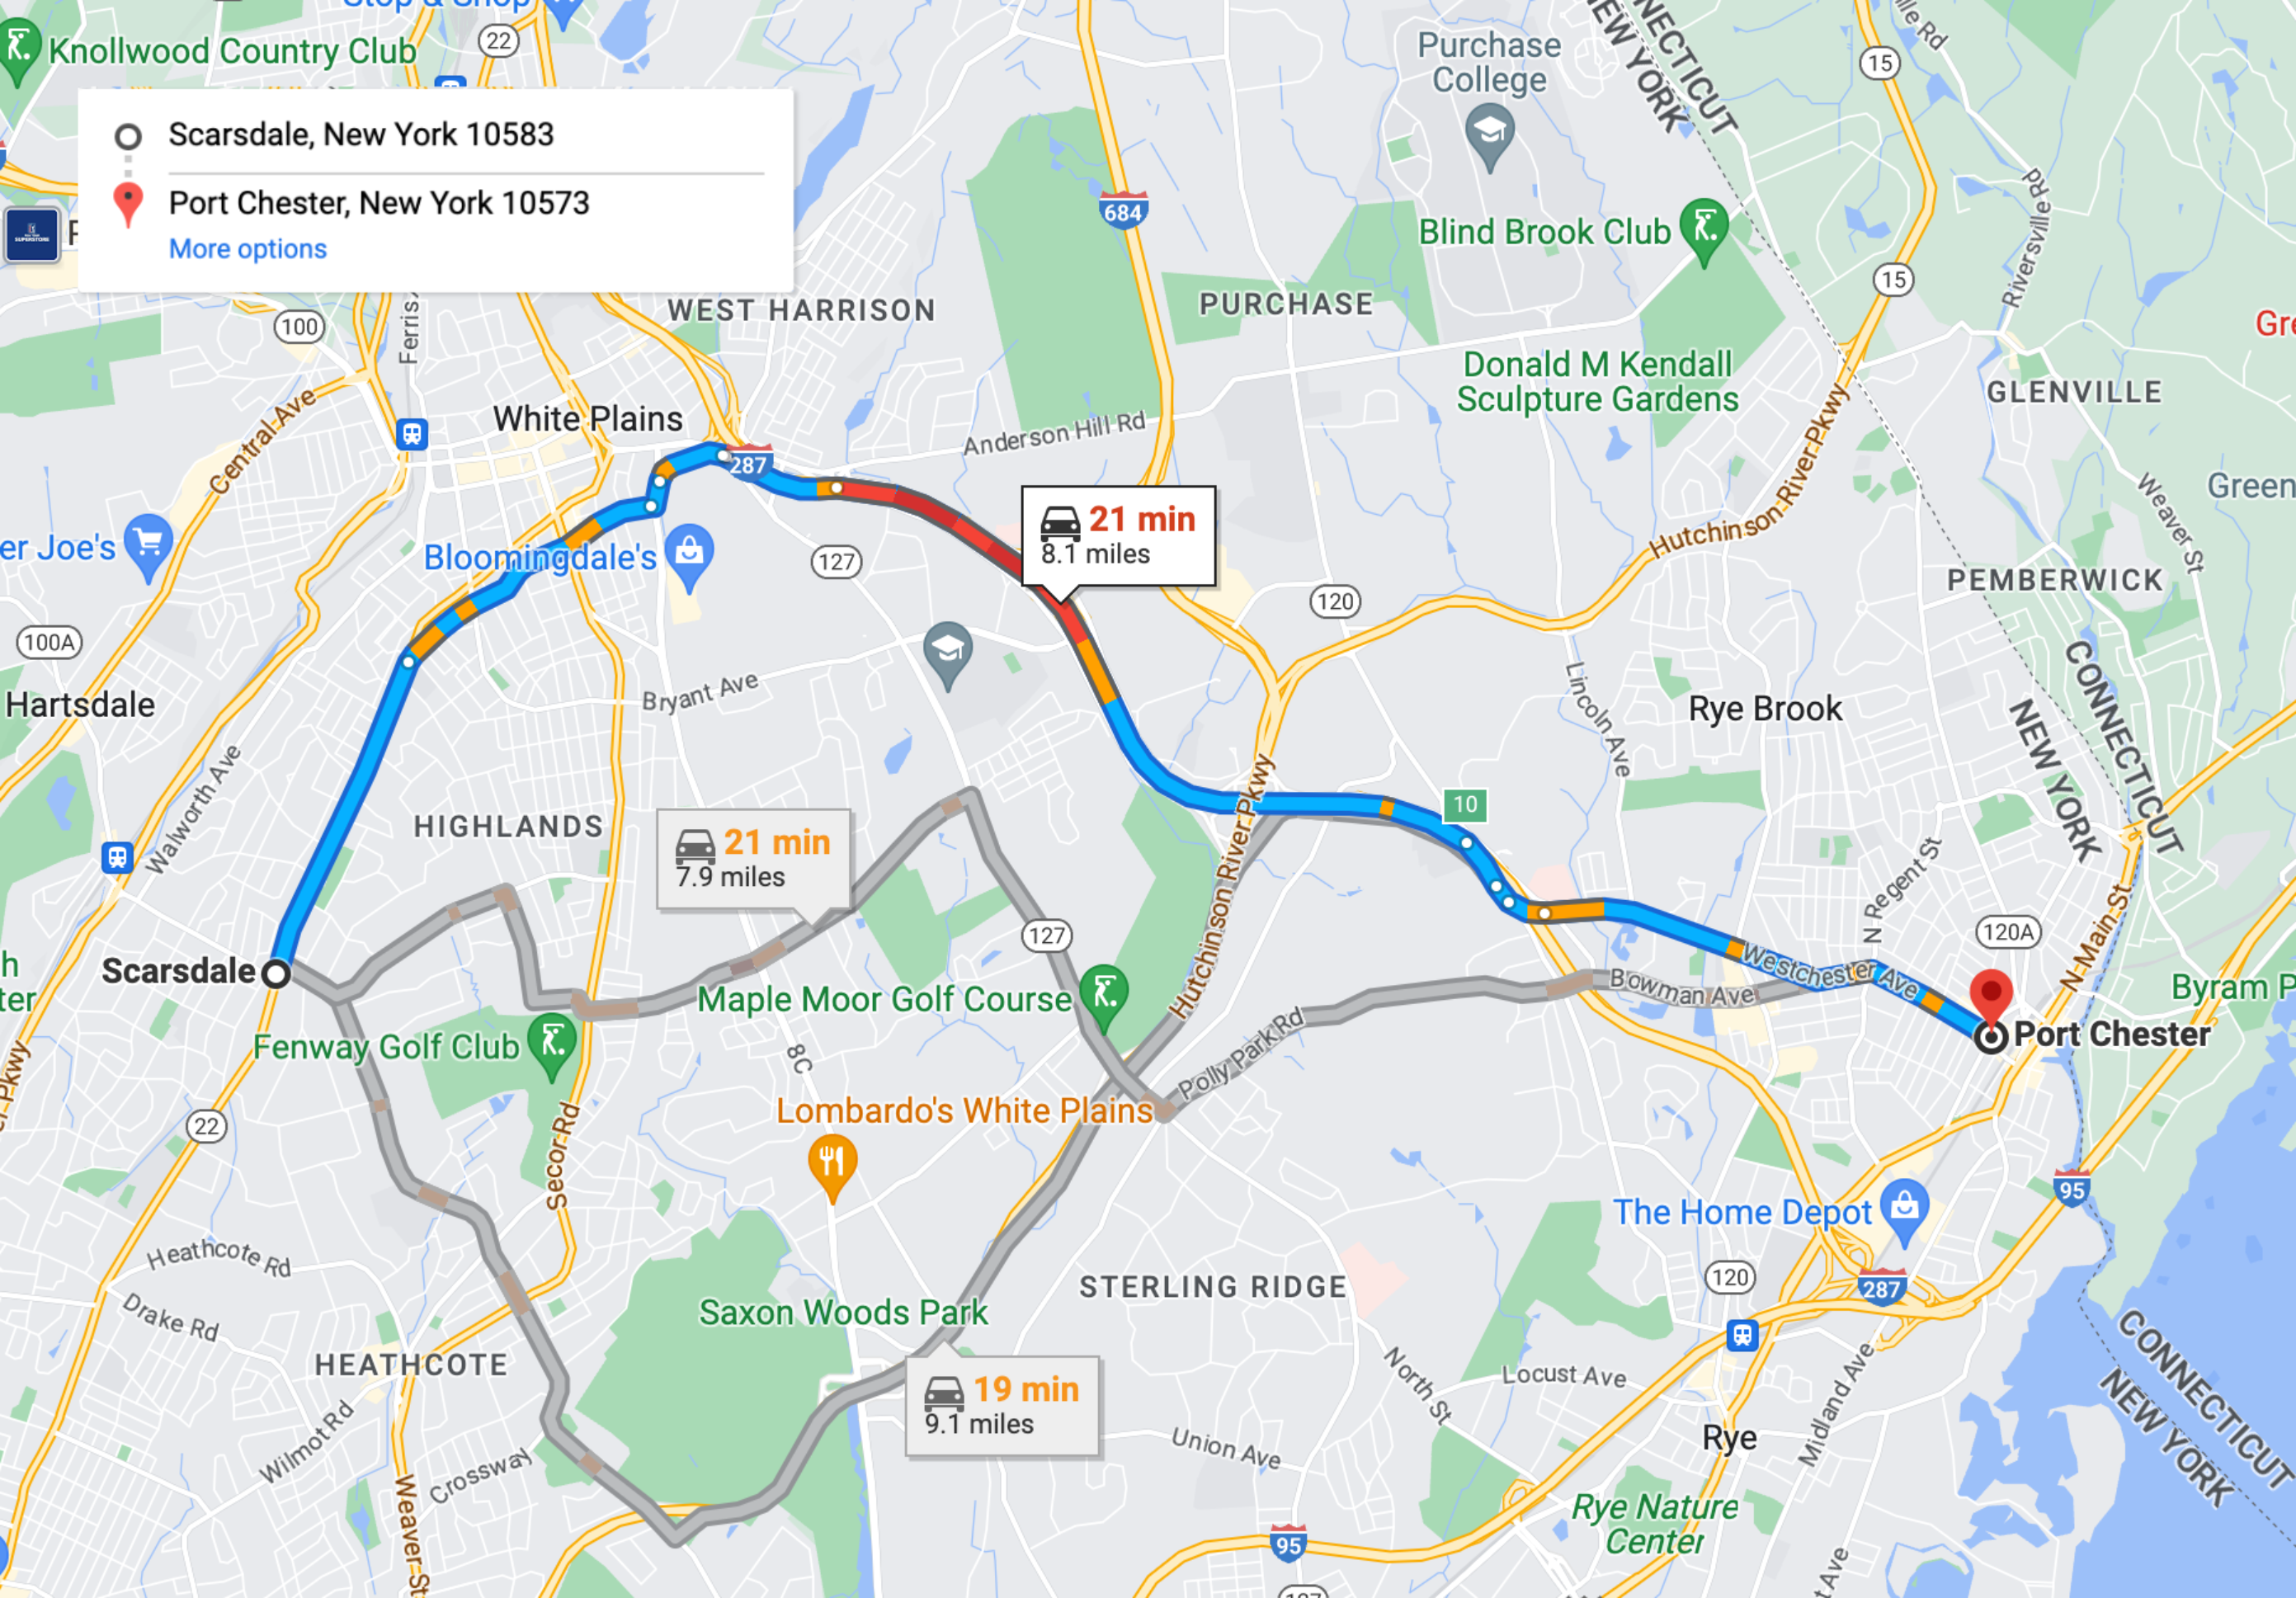 A Google Maps screenshot that shows the quickest route between Scarsdale and Port Chester.